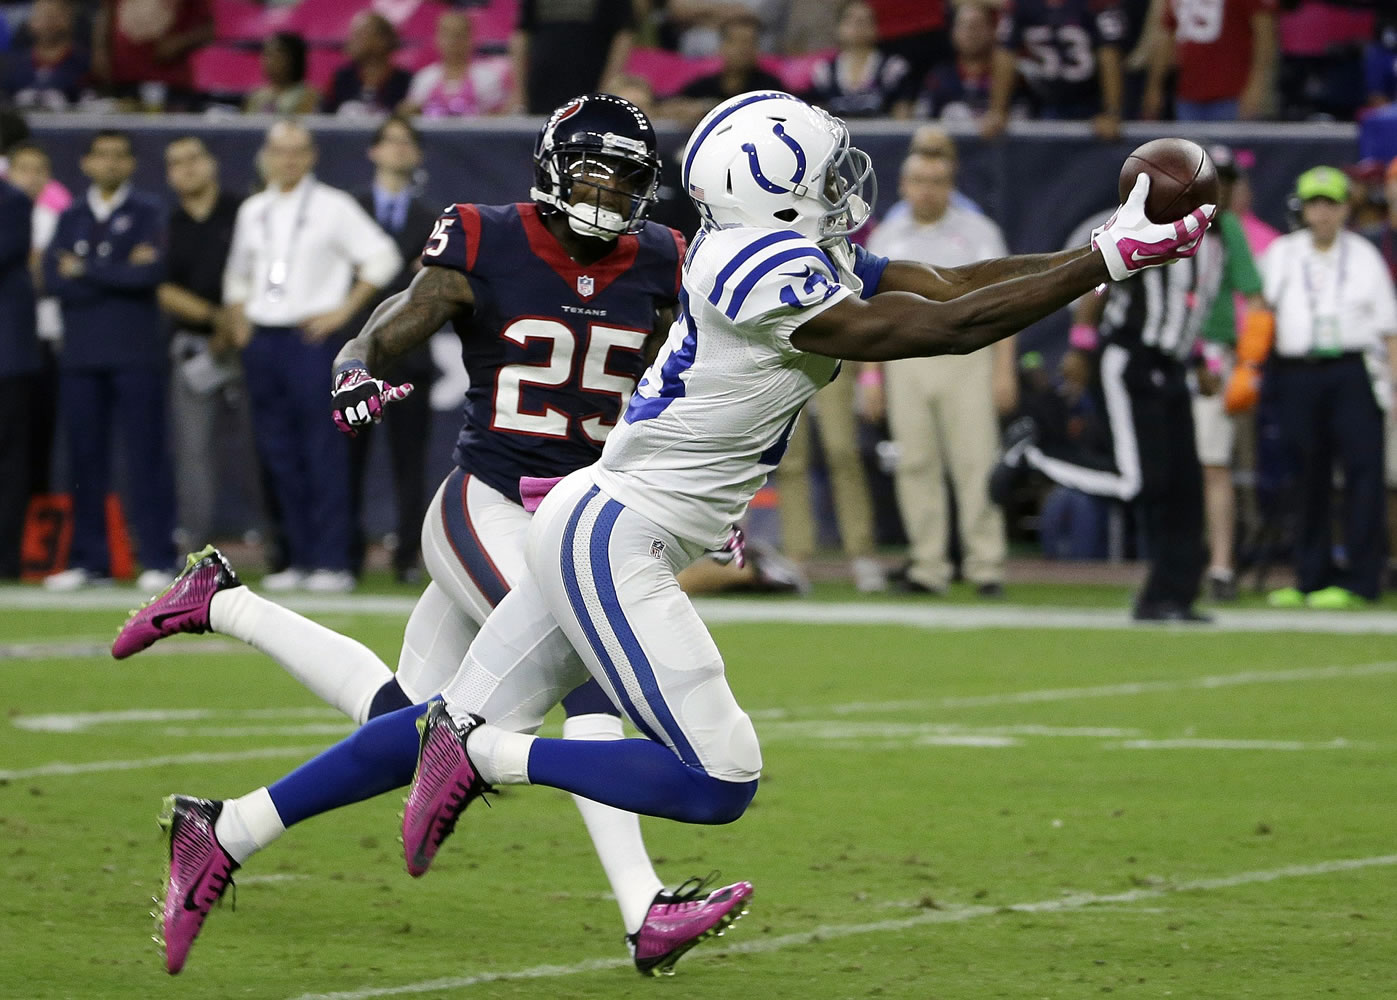 Indianapolis Colts' T.Y. Hilton (13) catches a pass in front of Houston Texans' Kareem Jackson (25) during the first quarter Thursday, Oct. 9, 2014, in Houston. (AP Photo/David J.